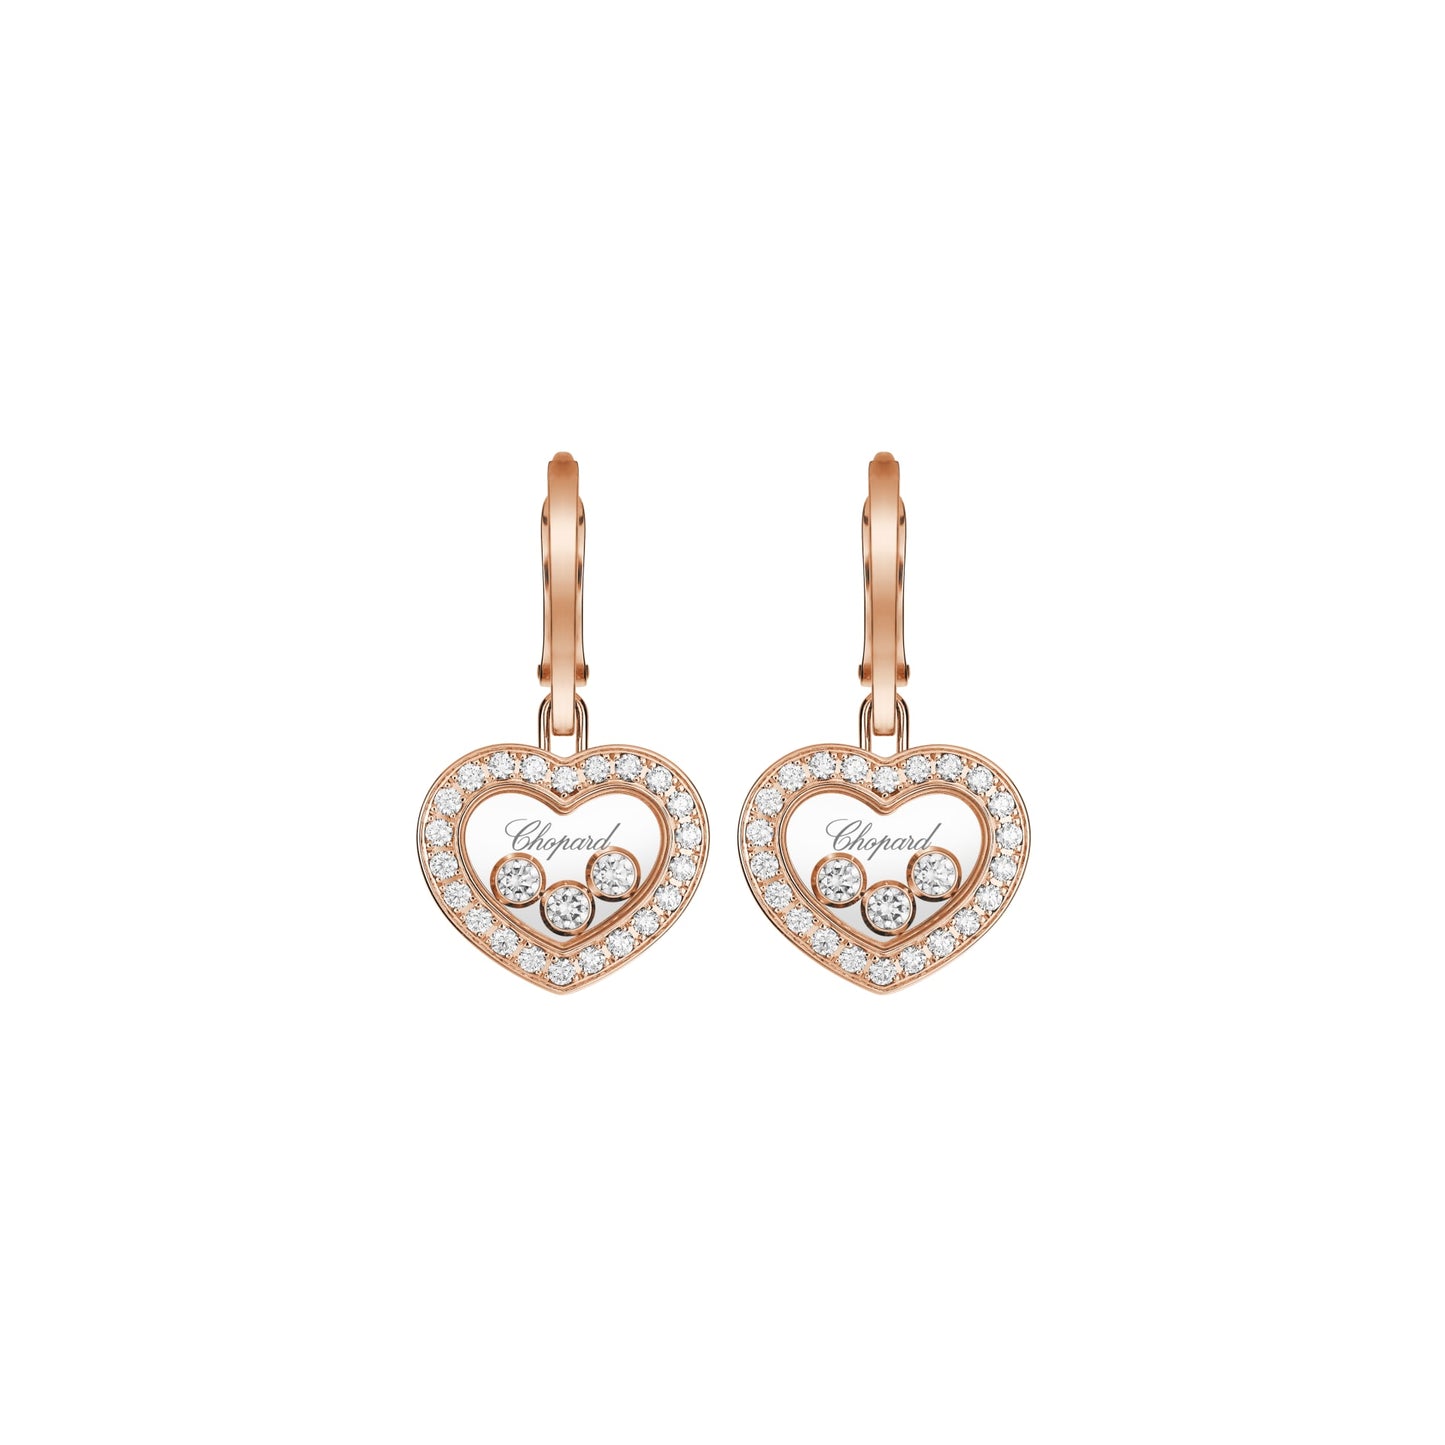 HAPPY DIAMONDS ICONS EARRINGS, ETHICAL ROSE GOLD, DIAMONDS 83A611-5401